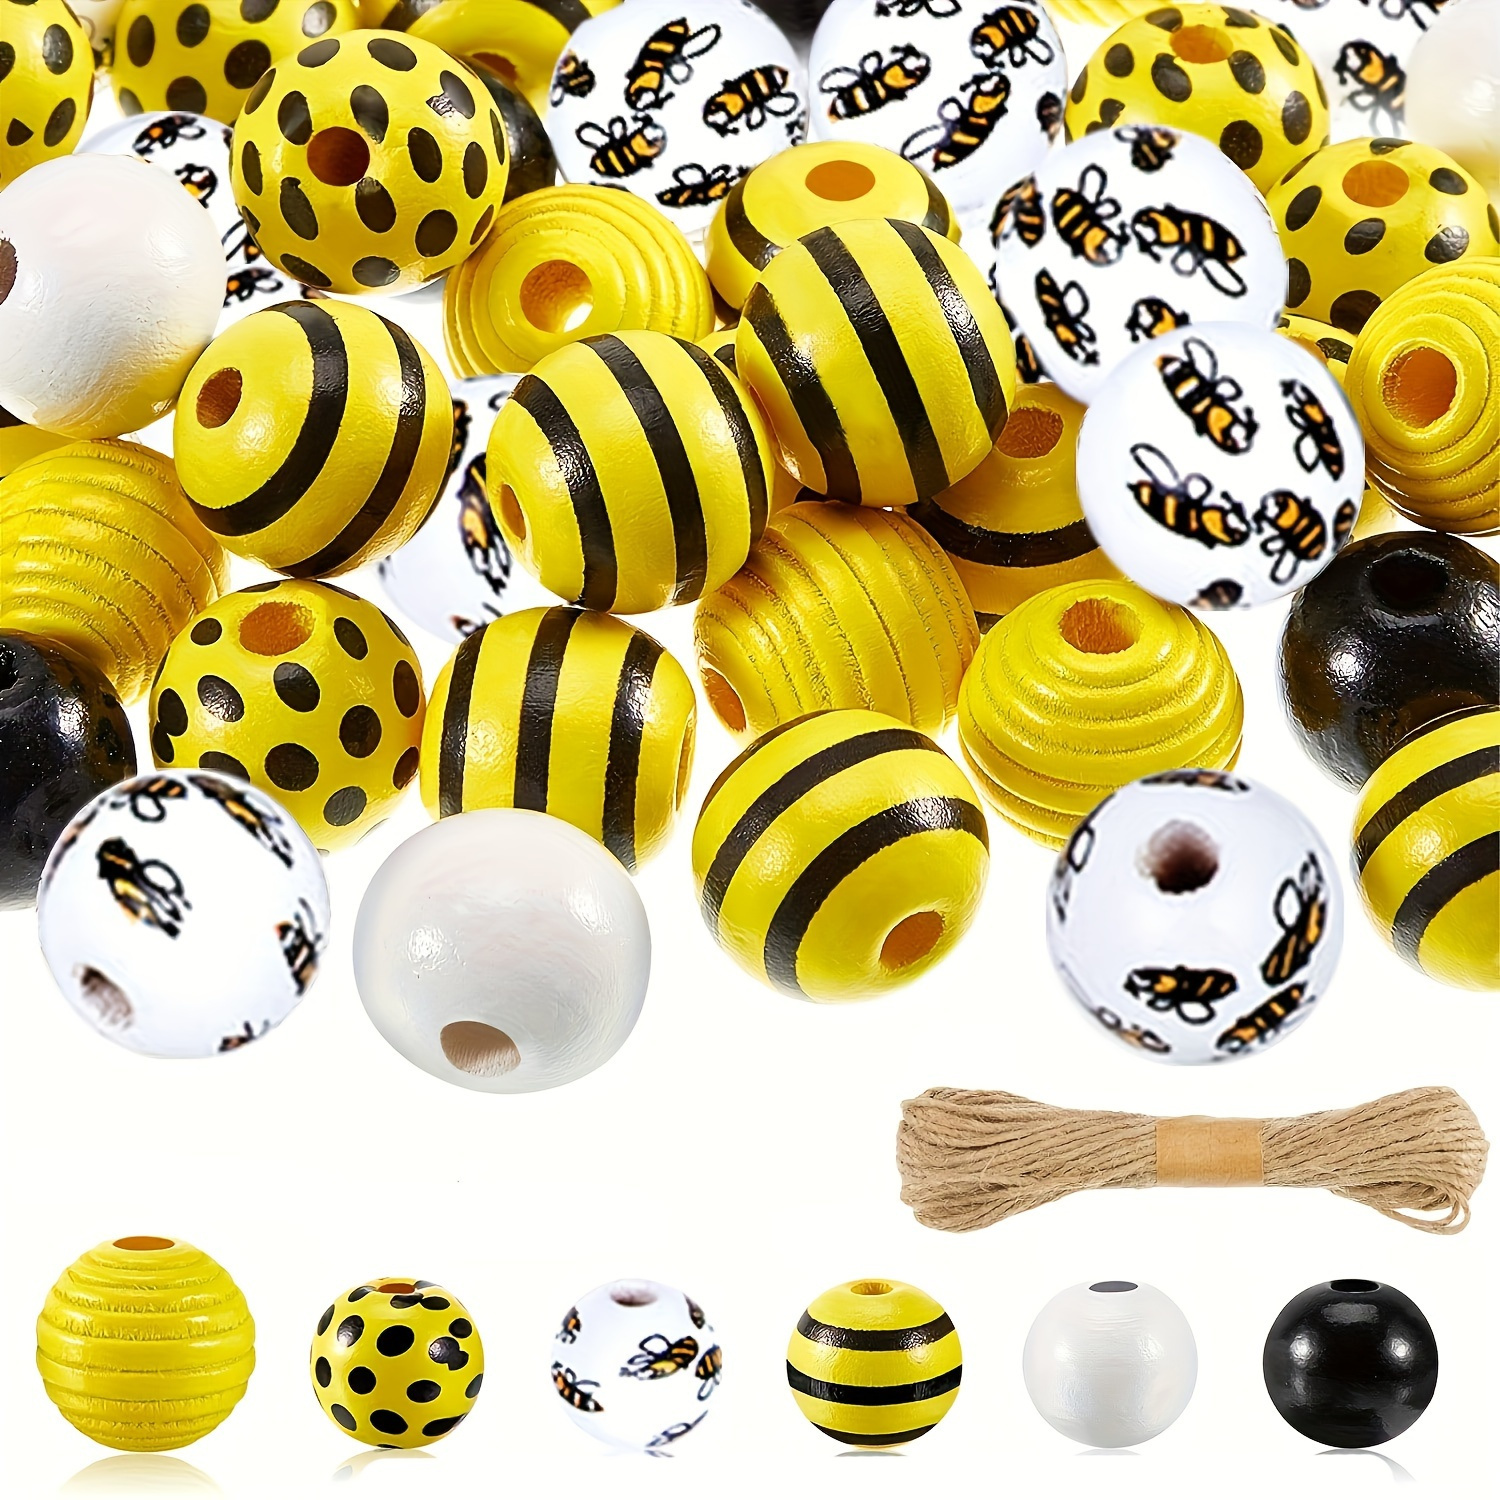 

60pcs 16mm Bee Honeycomb Wood Beads With Rope Spring Summer Loose Polished Rustic Farmhouse Spacer Beads For Bee Day Themed Beaded Decorations Jewelry Making Supplies